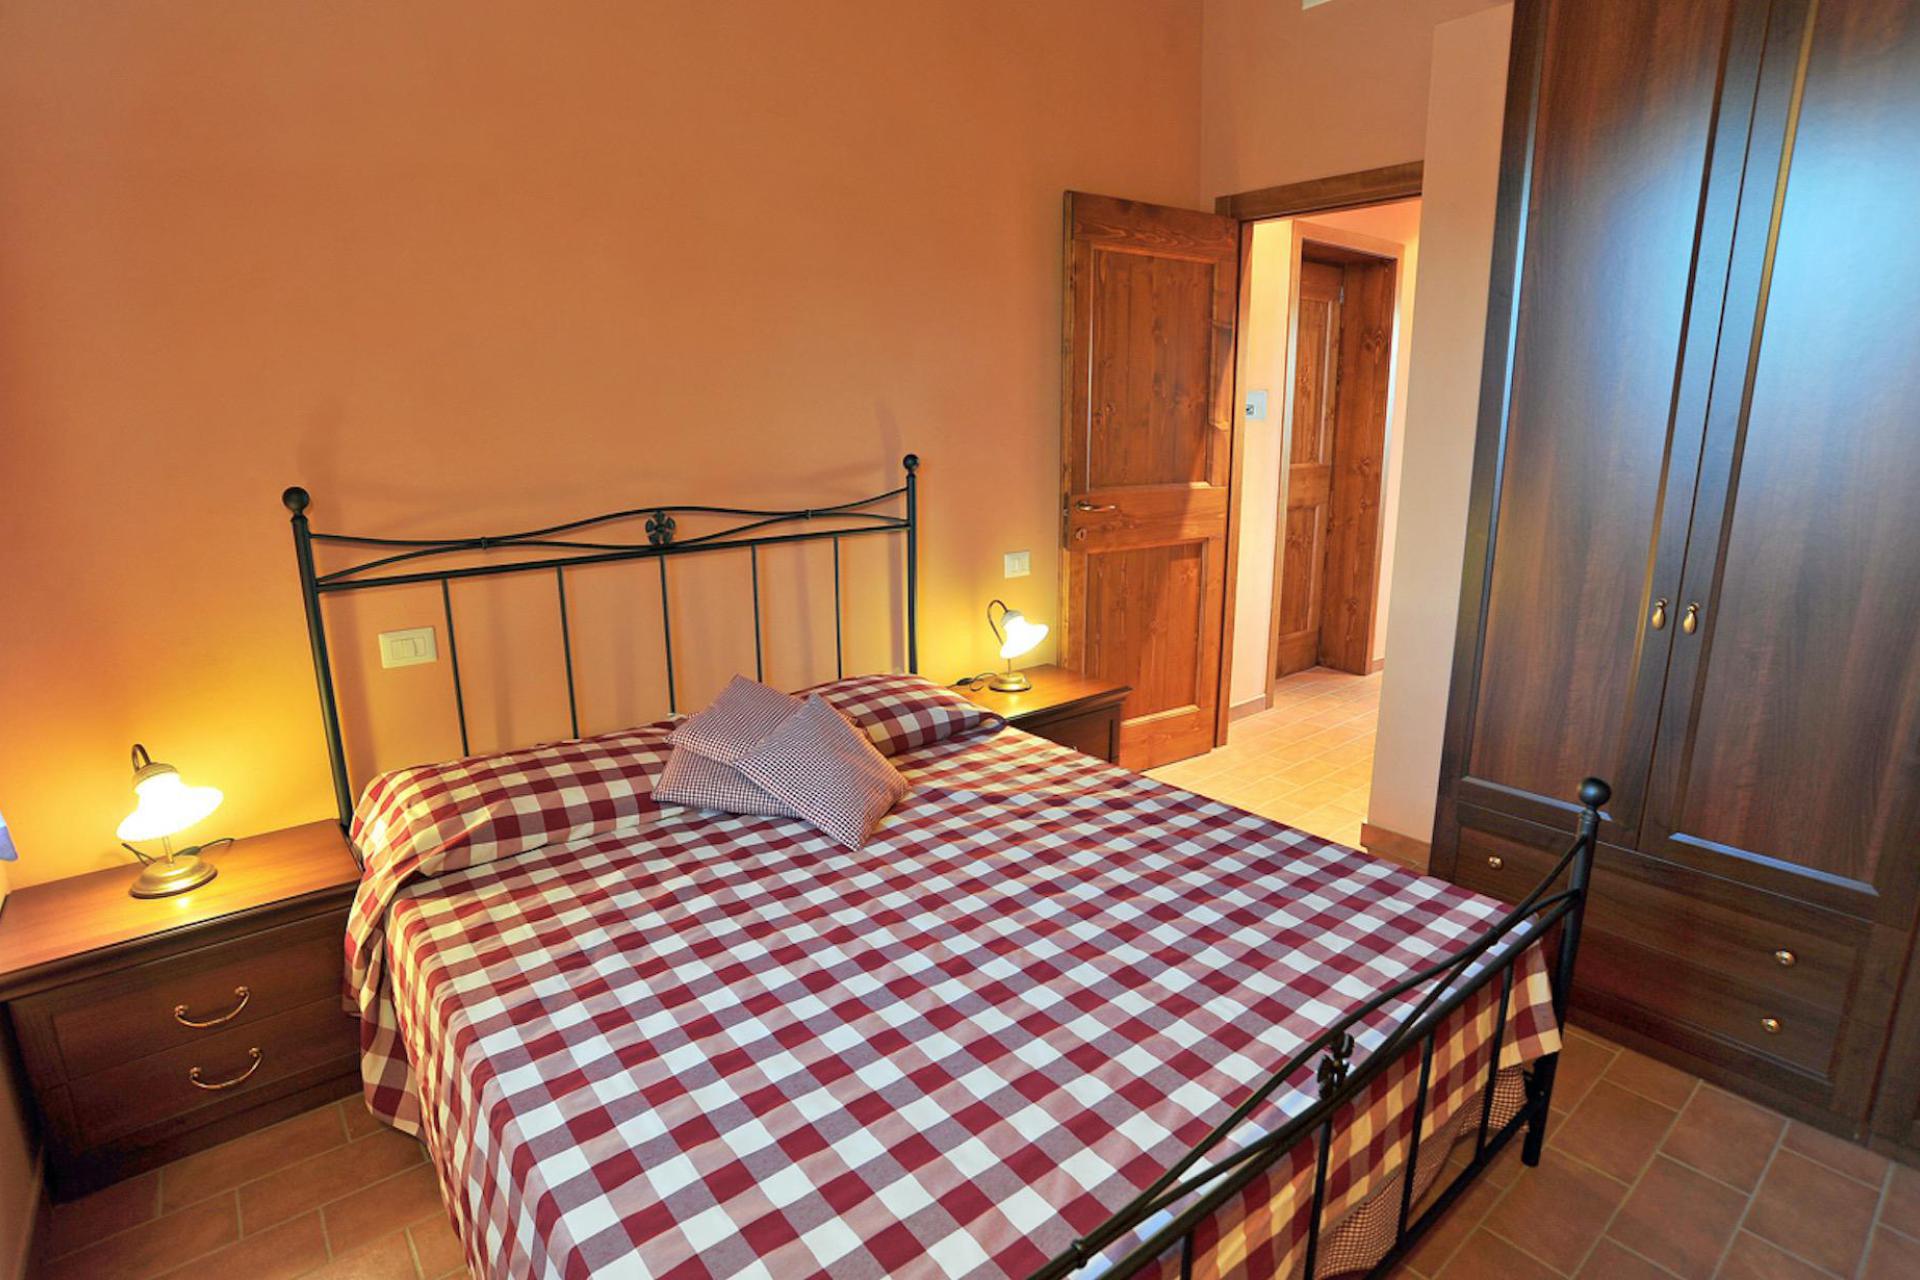 Agriturismo Marche 20 minutes from the beach